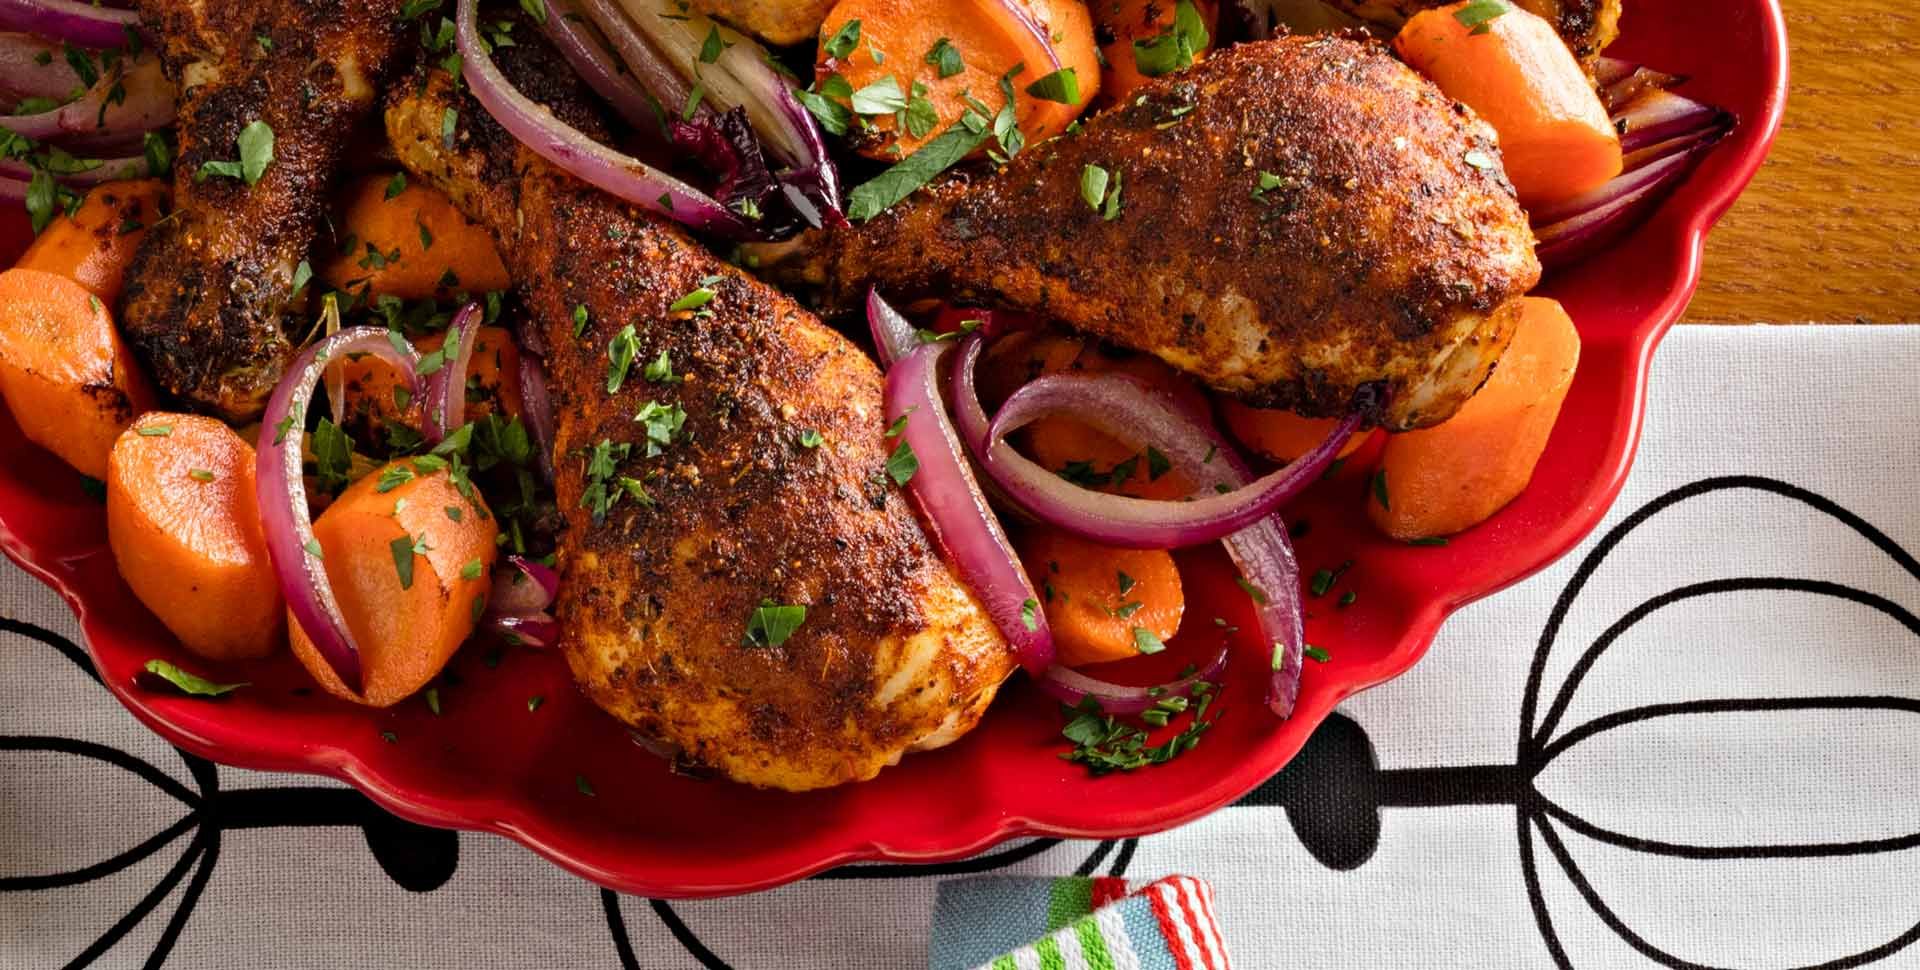 Seasoned Chicken Legs with Carrots and Onions